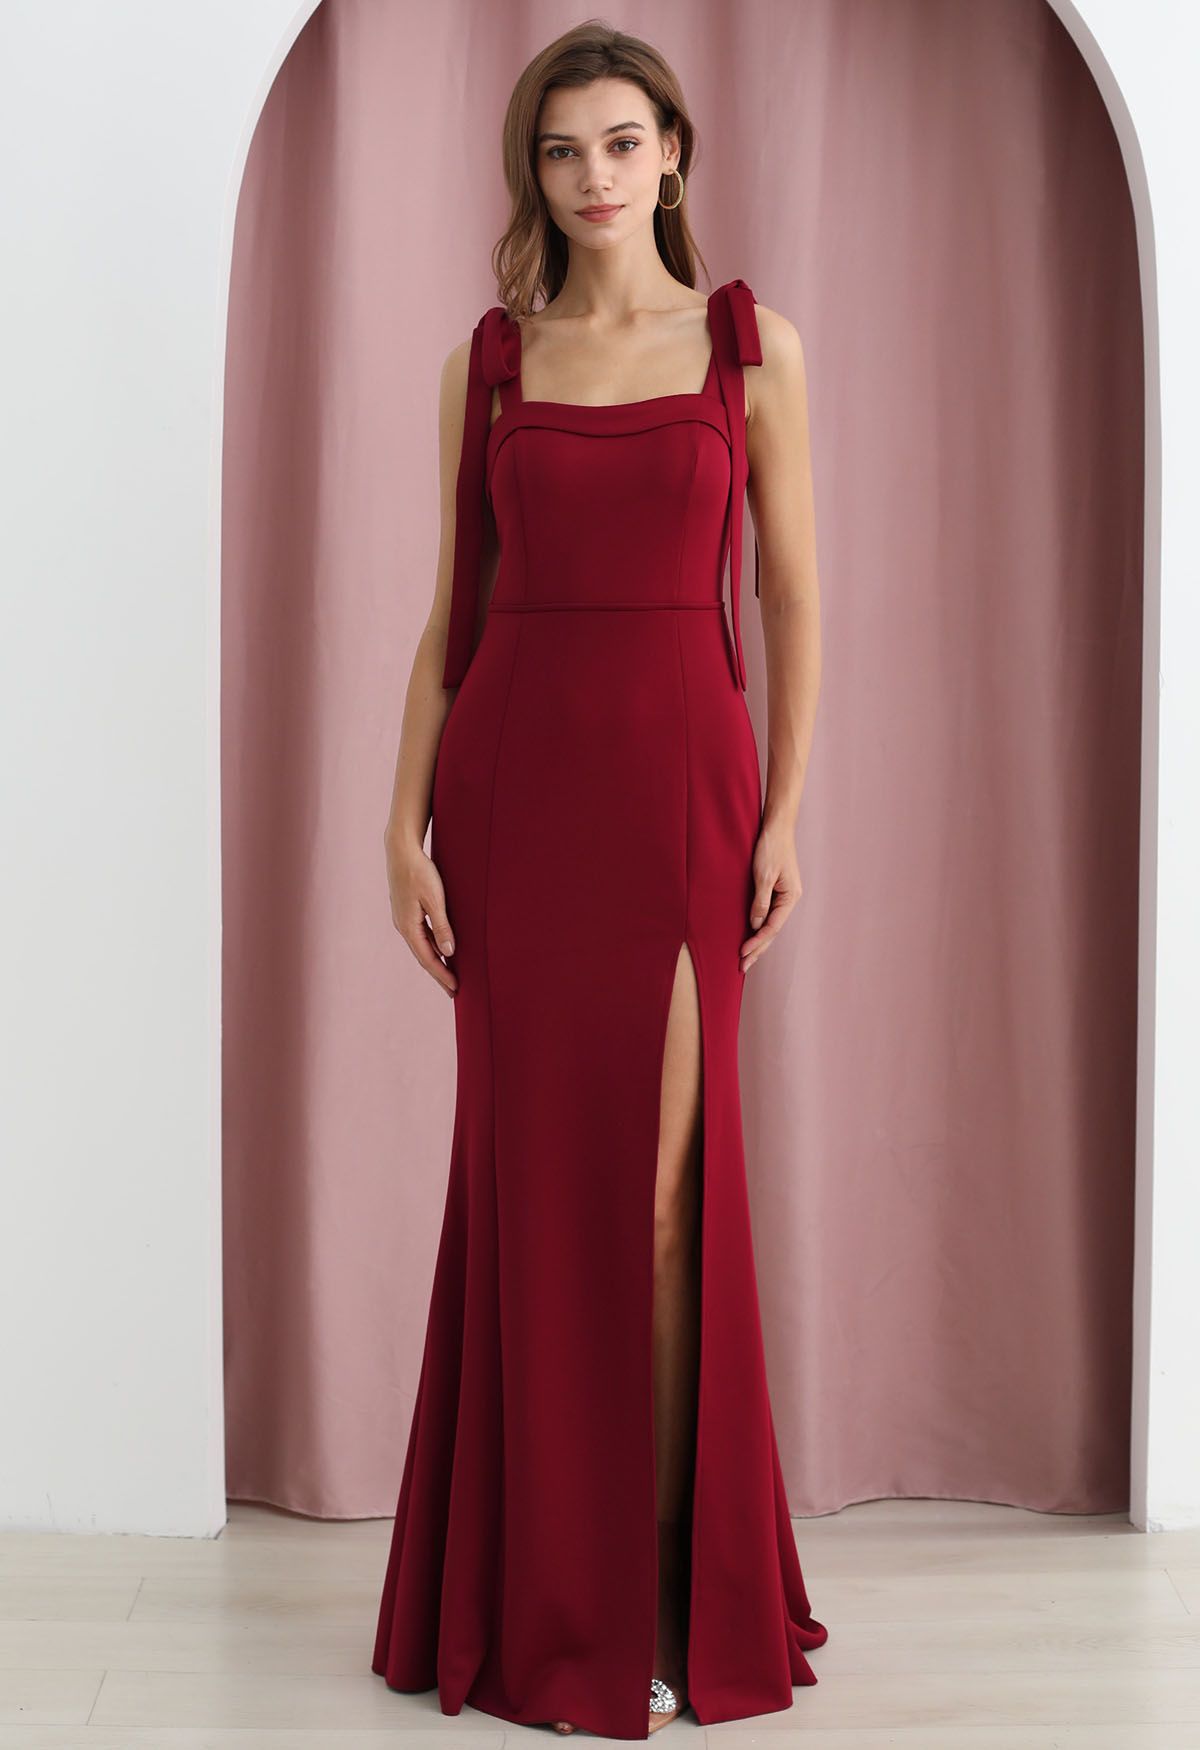 Tie-Shoulder High Slit Maxi Gown in Red